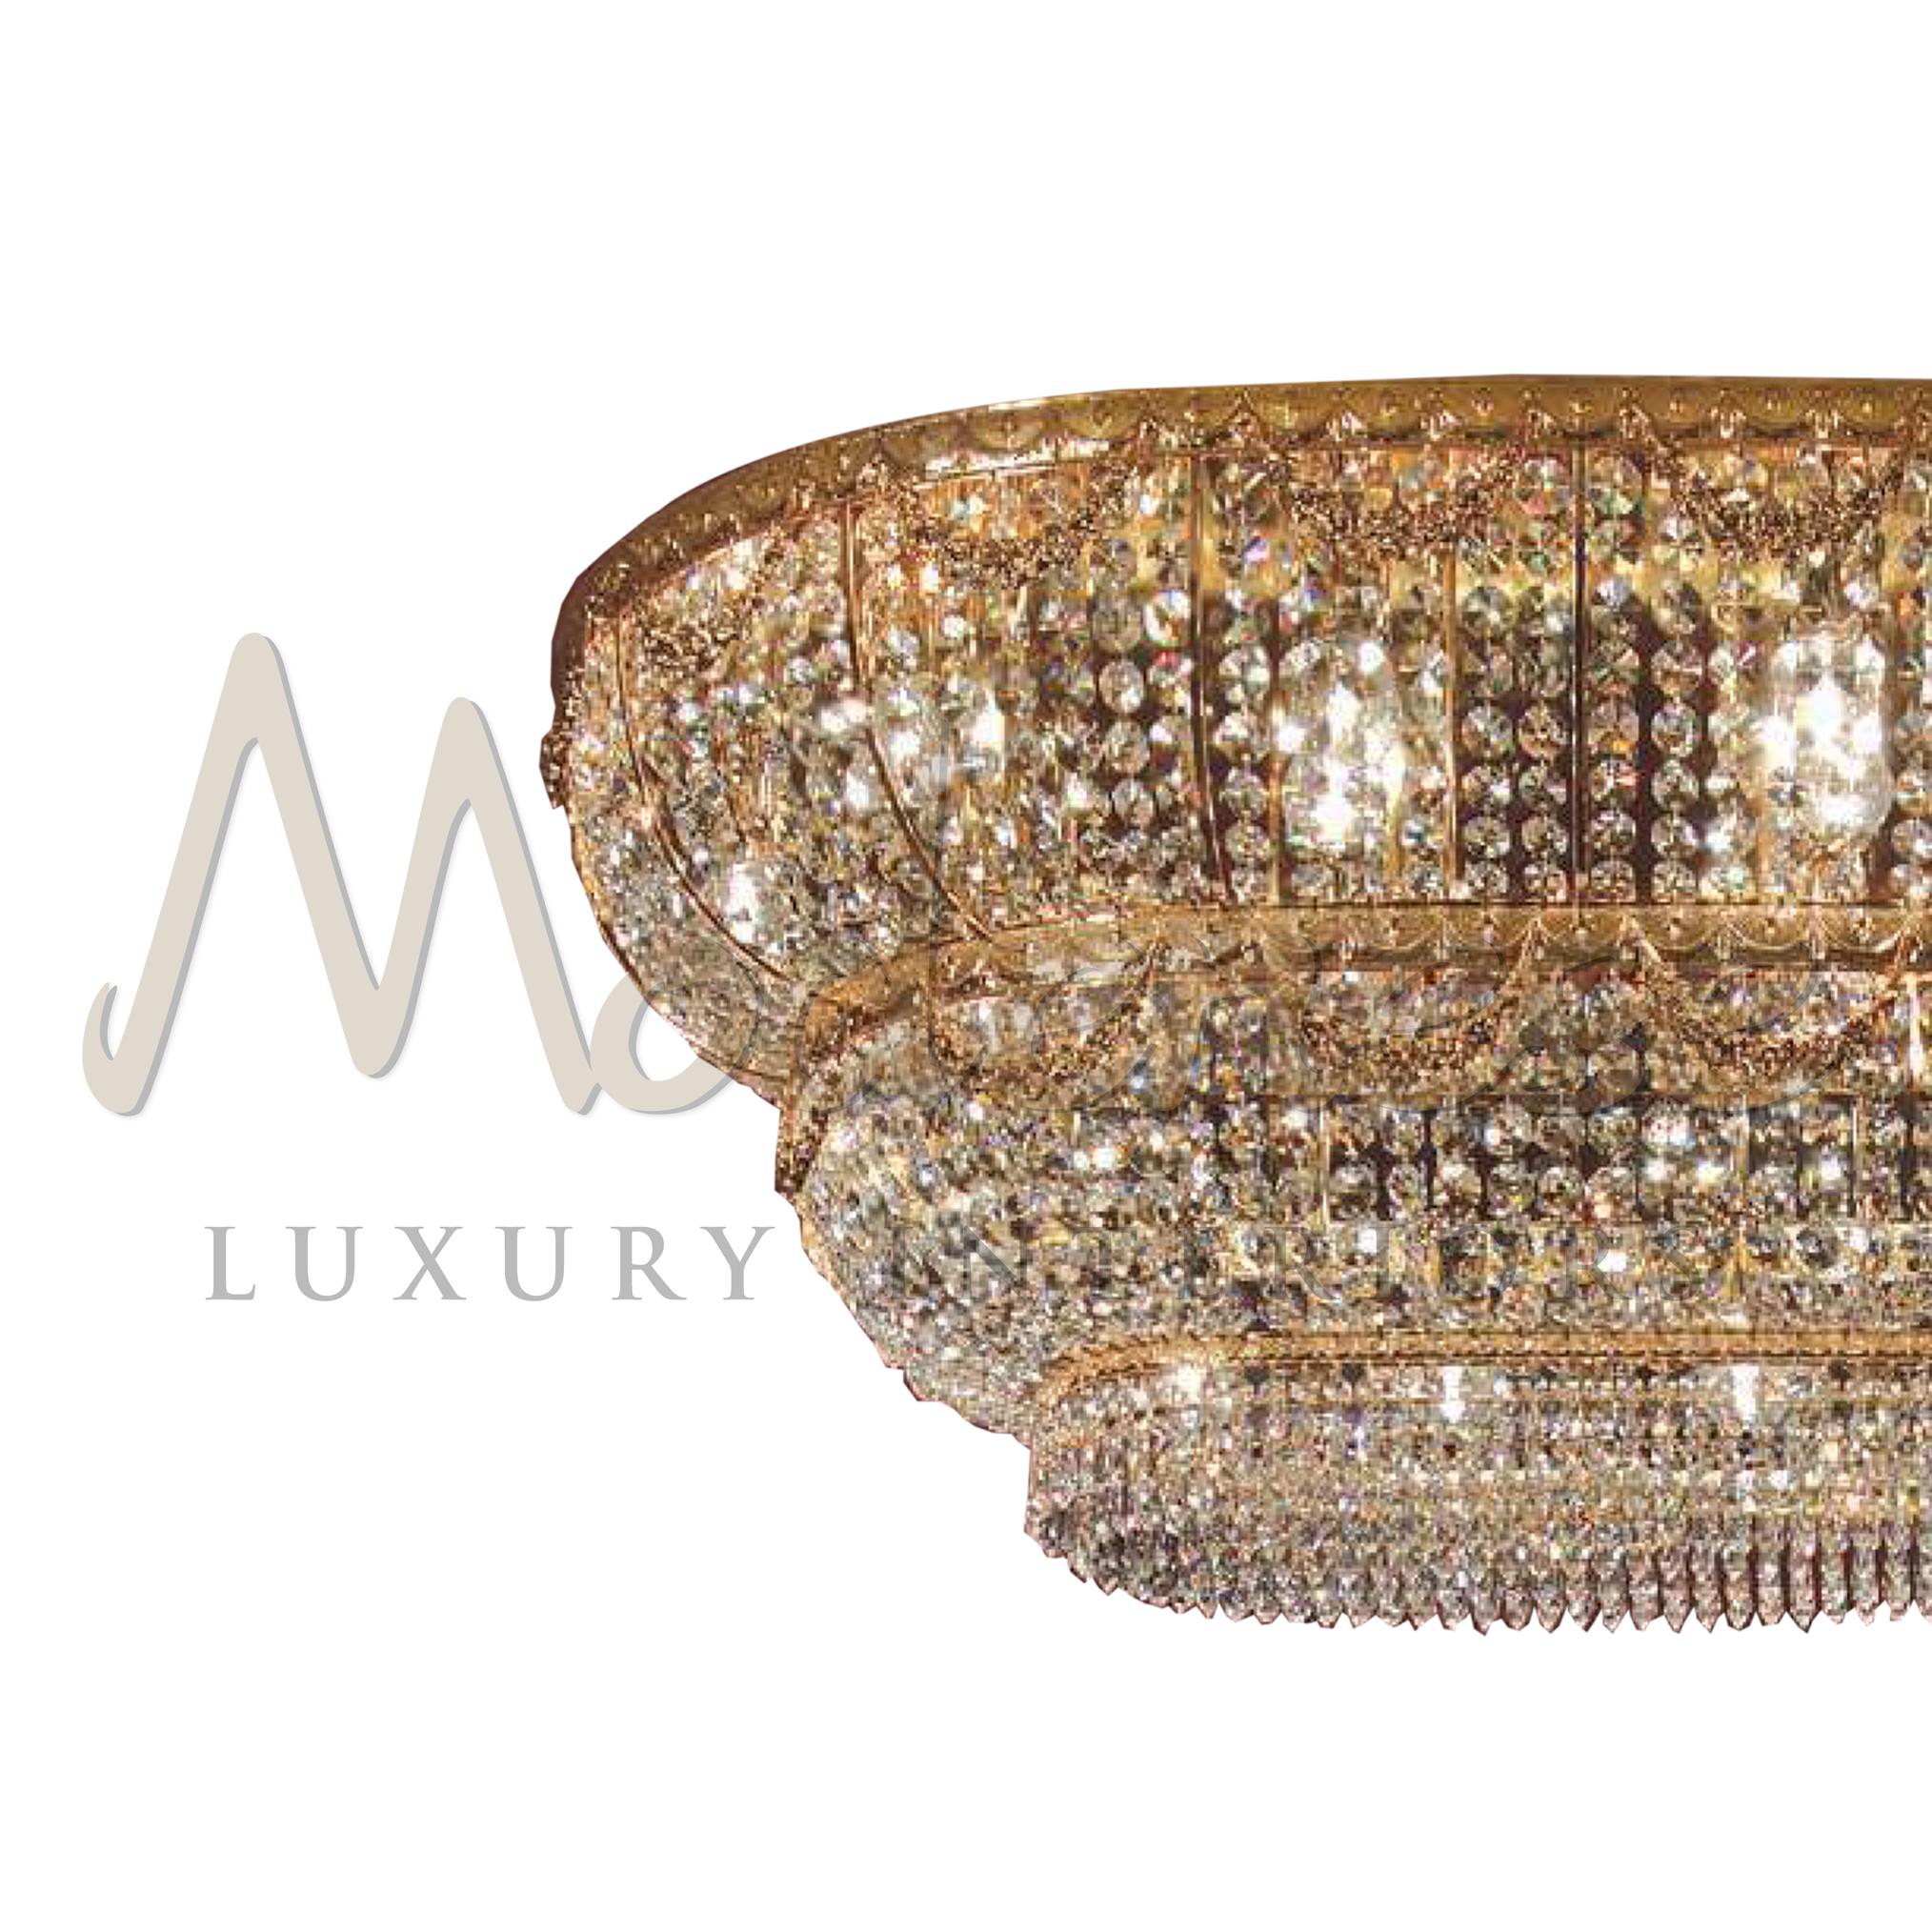 Traditional Italian design and modern production techniques makeup the decorative appearance of the Modenese Gastone Luxury Interiors ceiling lamp. With its 24 kt gold plate and scholer crystals, this model is pure finesse. This model requires 20